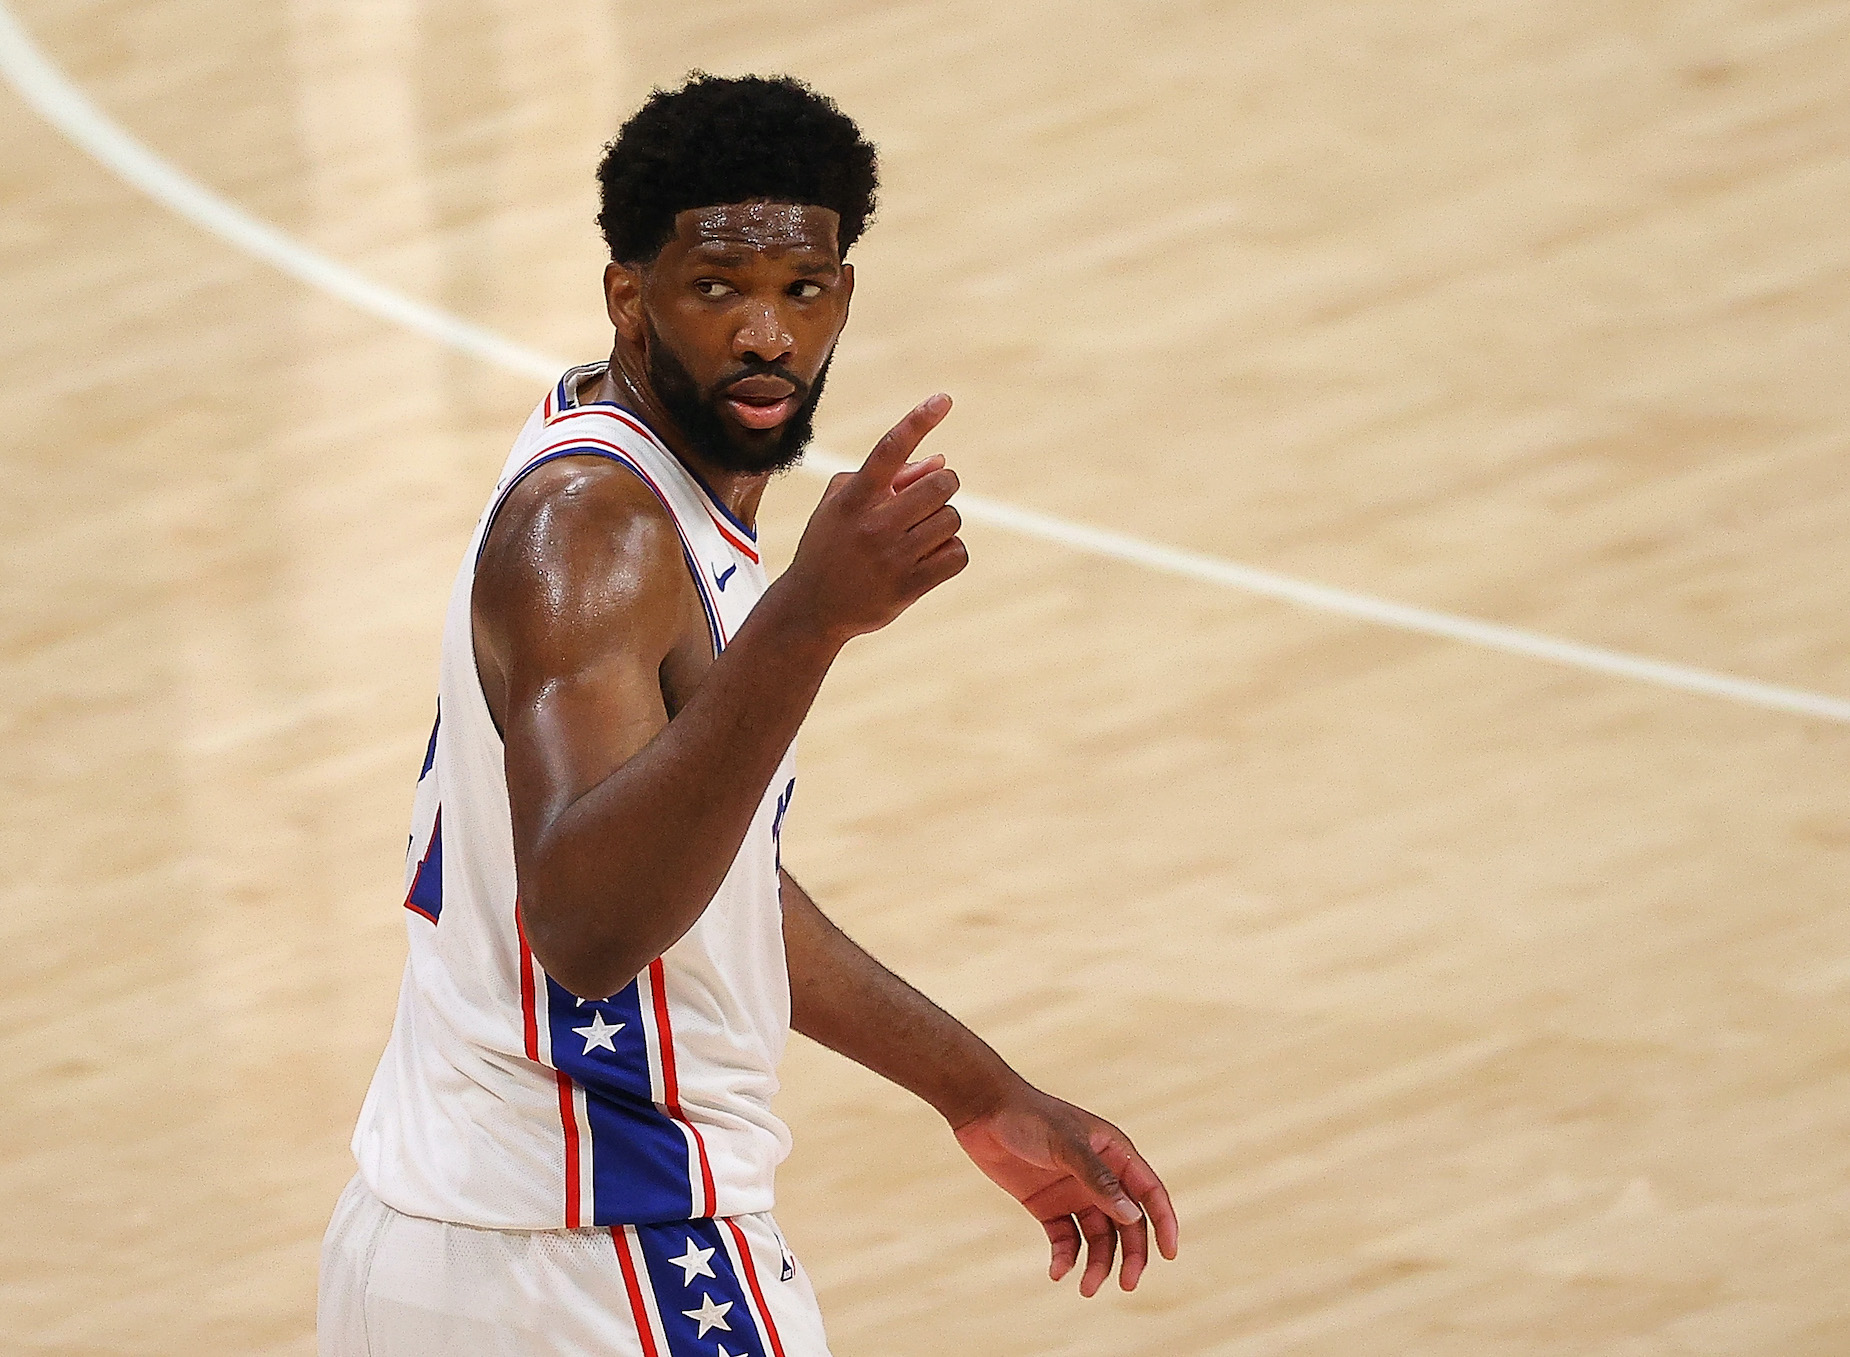 Joel Embiid gestures on the court during a Philadelphia 76ers playoff game.